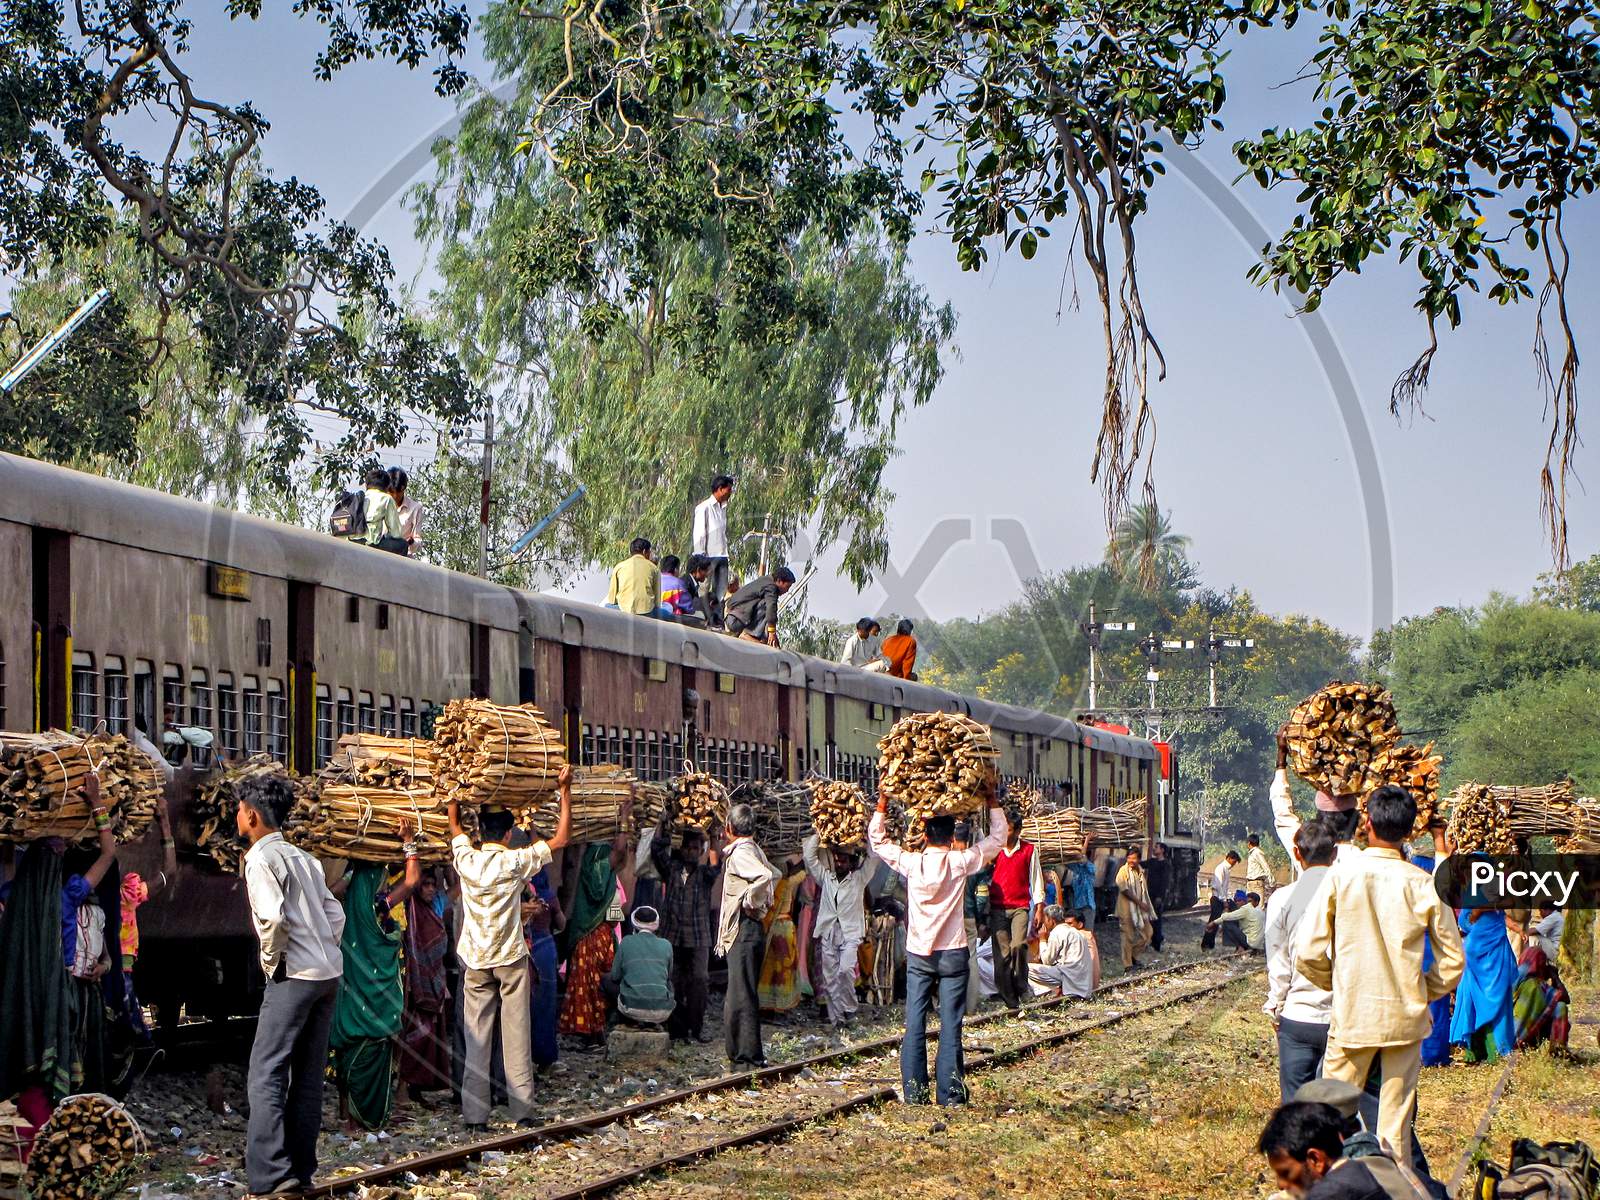 Local villagers with wood waiting for their train as pairing train waits for crossing.